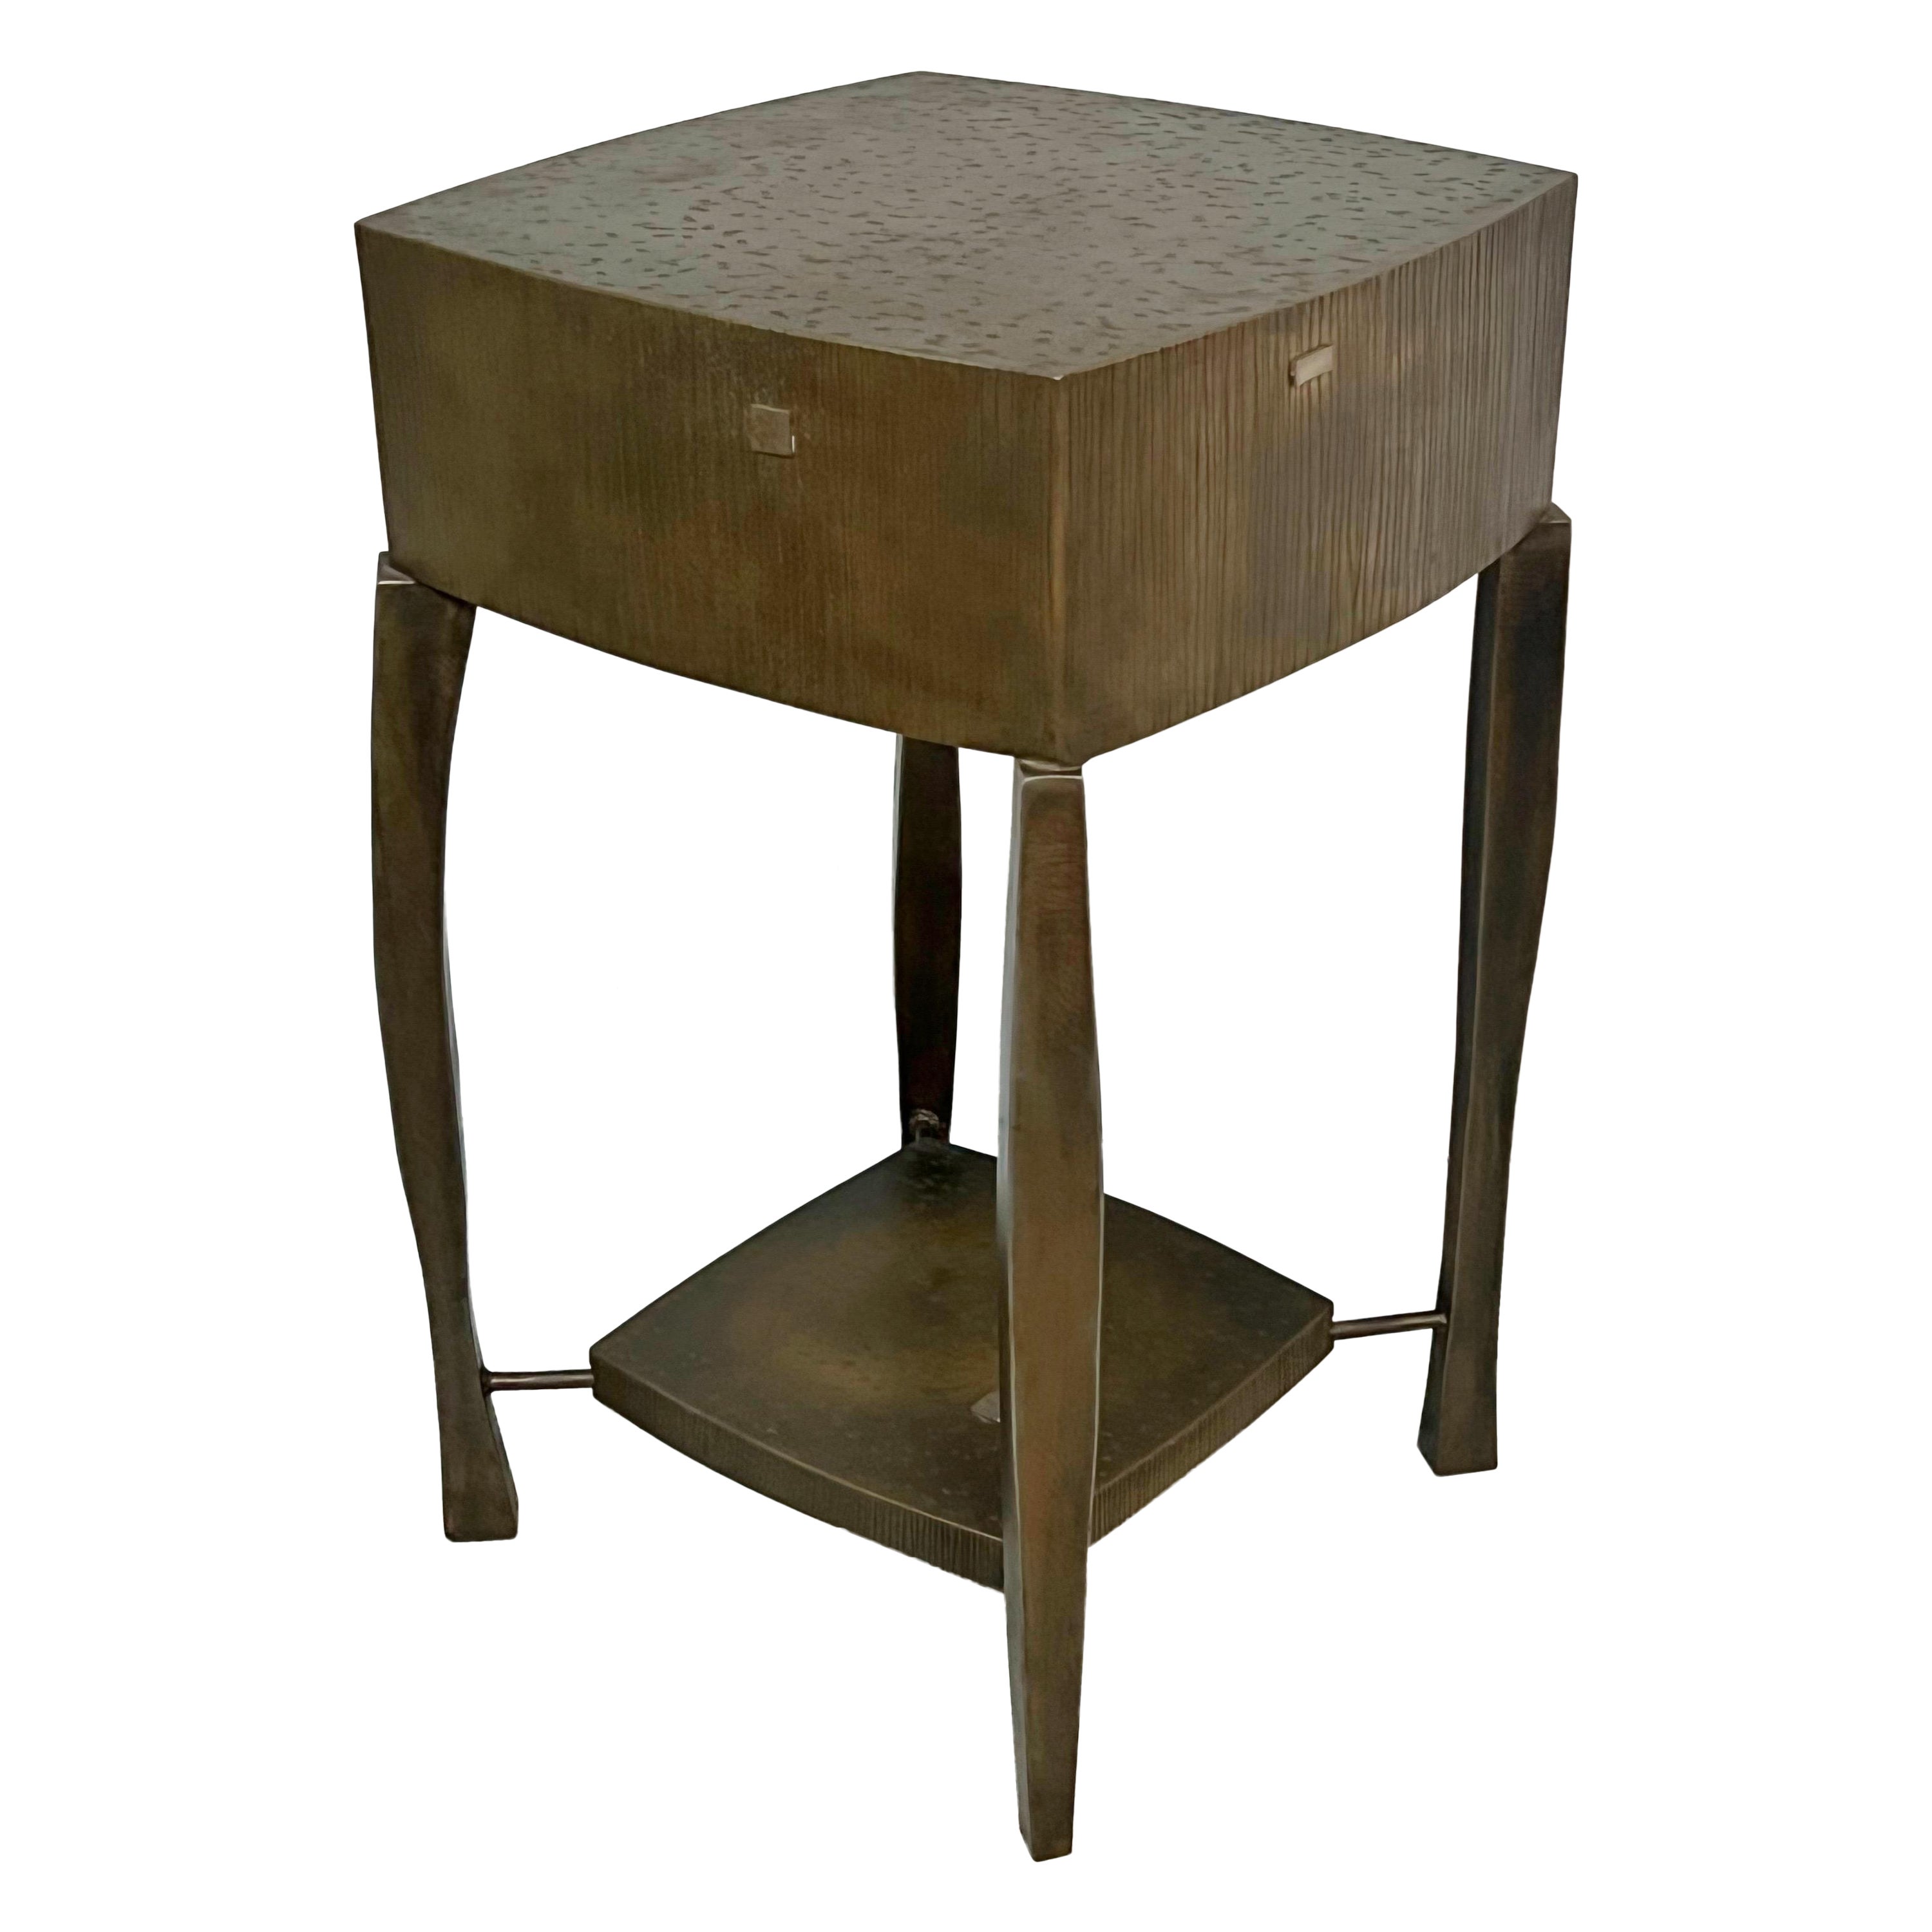 Gary Magakis Sculptural Metal Side Table, 2006